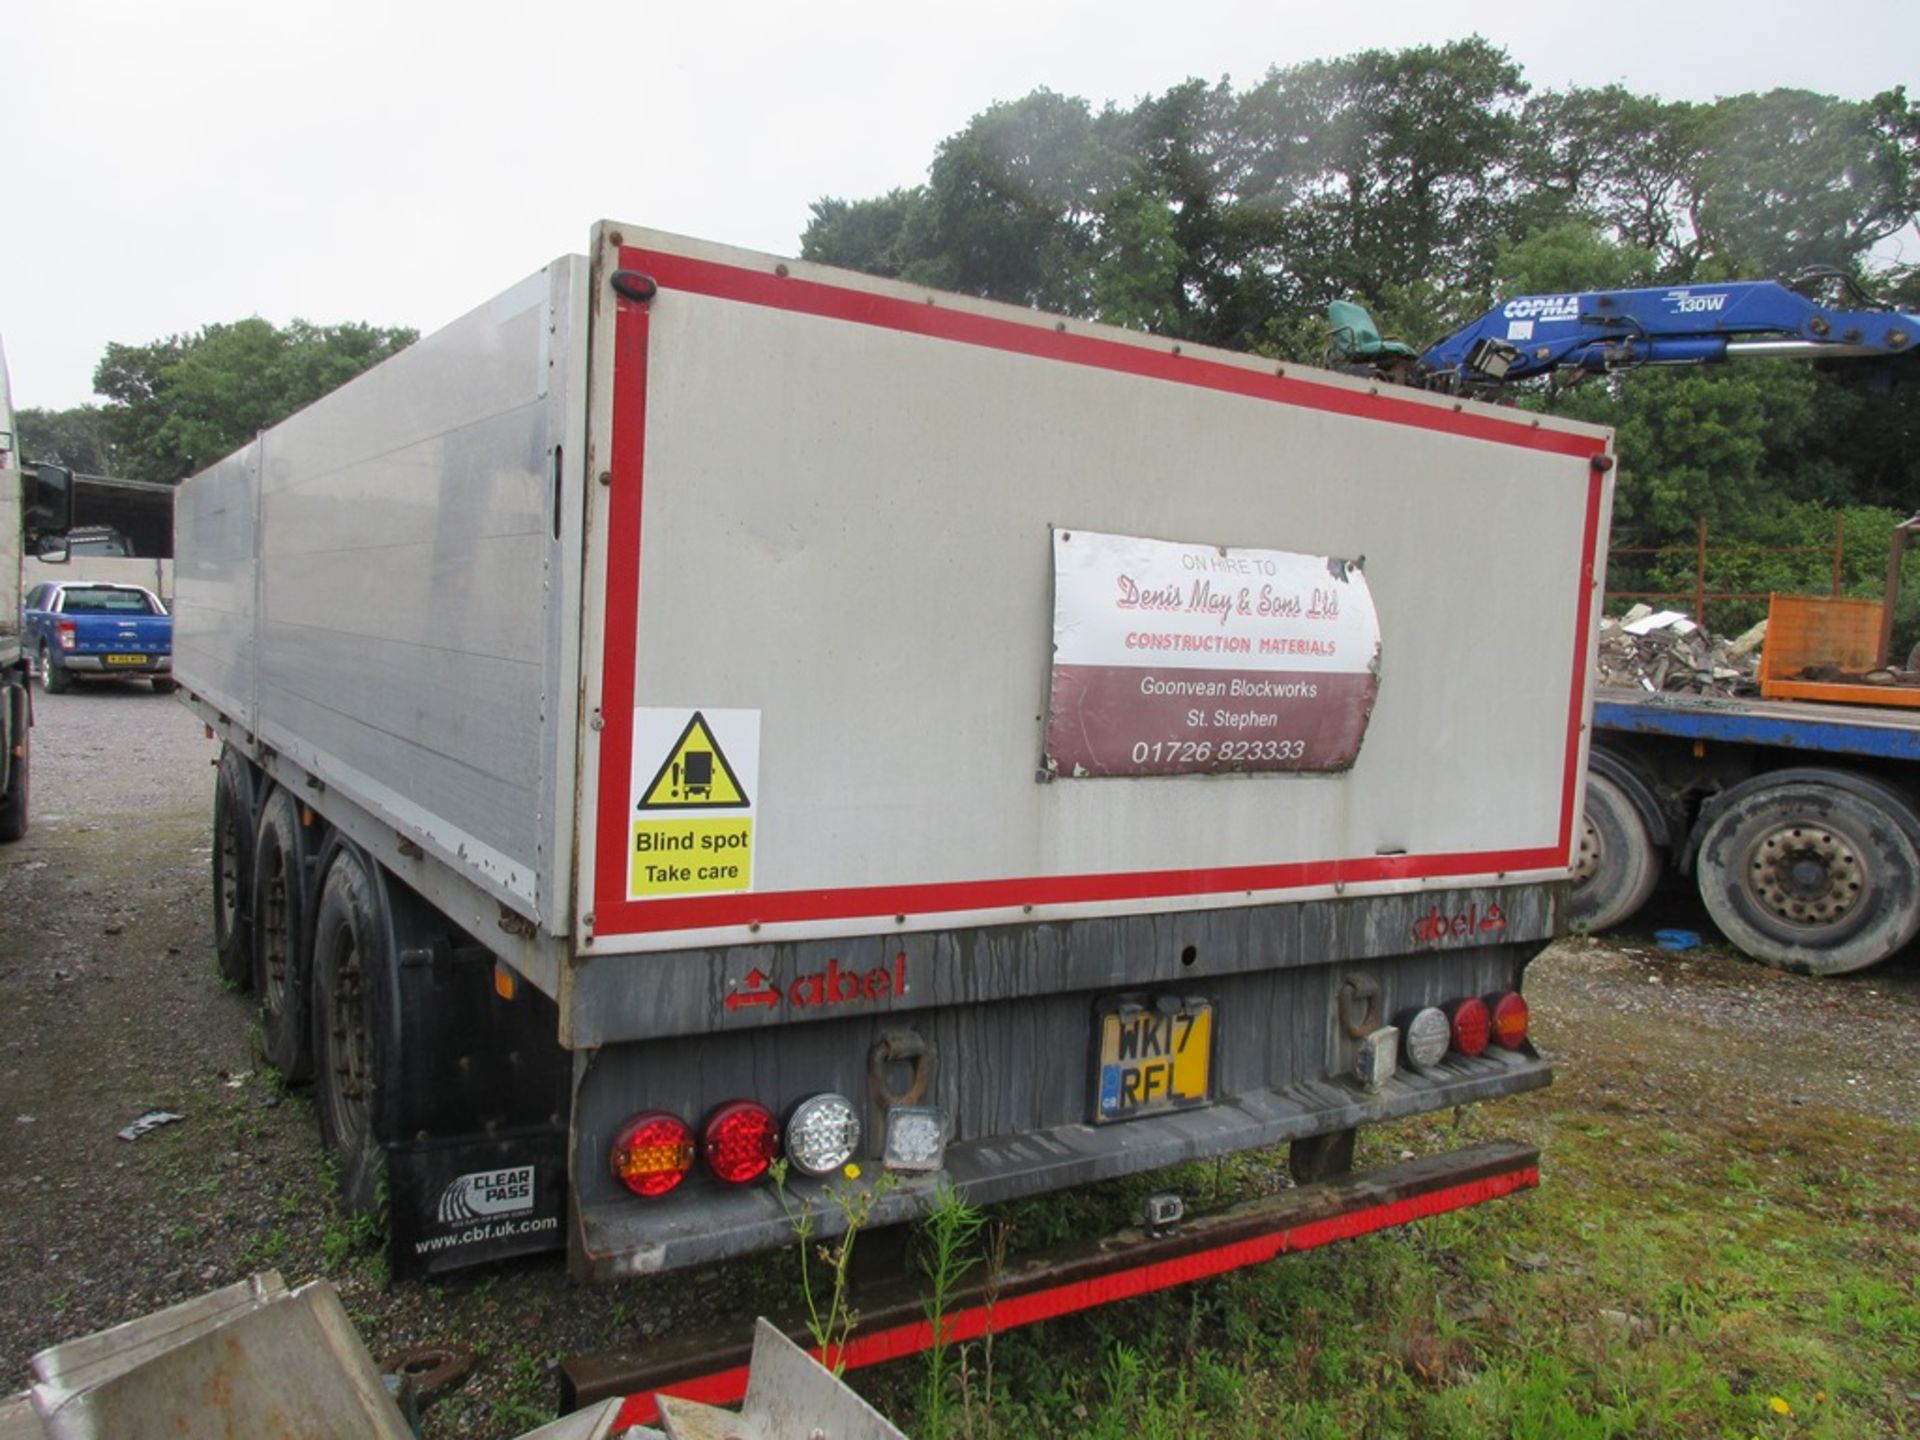 Abel tri-axle draw bar drop side flat bed trailer, model DB24CCA3R, serial no 3144.04 (2008) - bed - Image 6 of 10